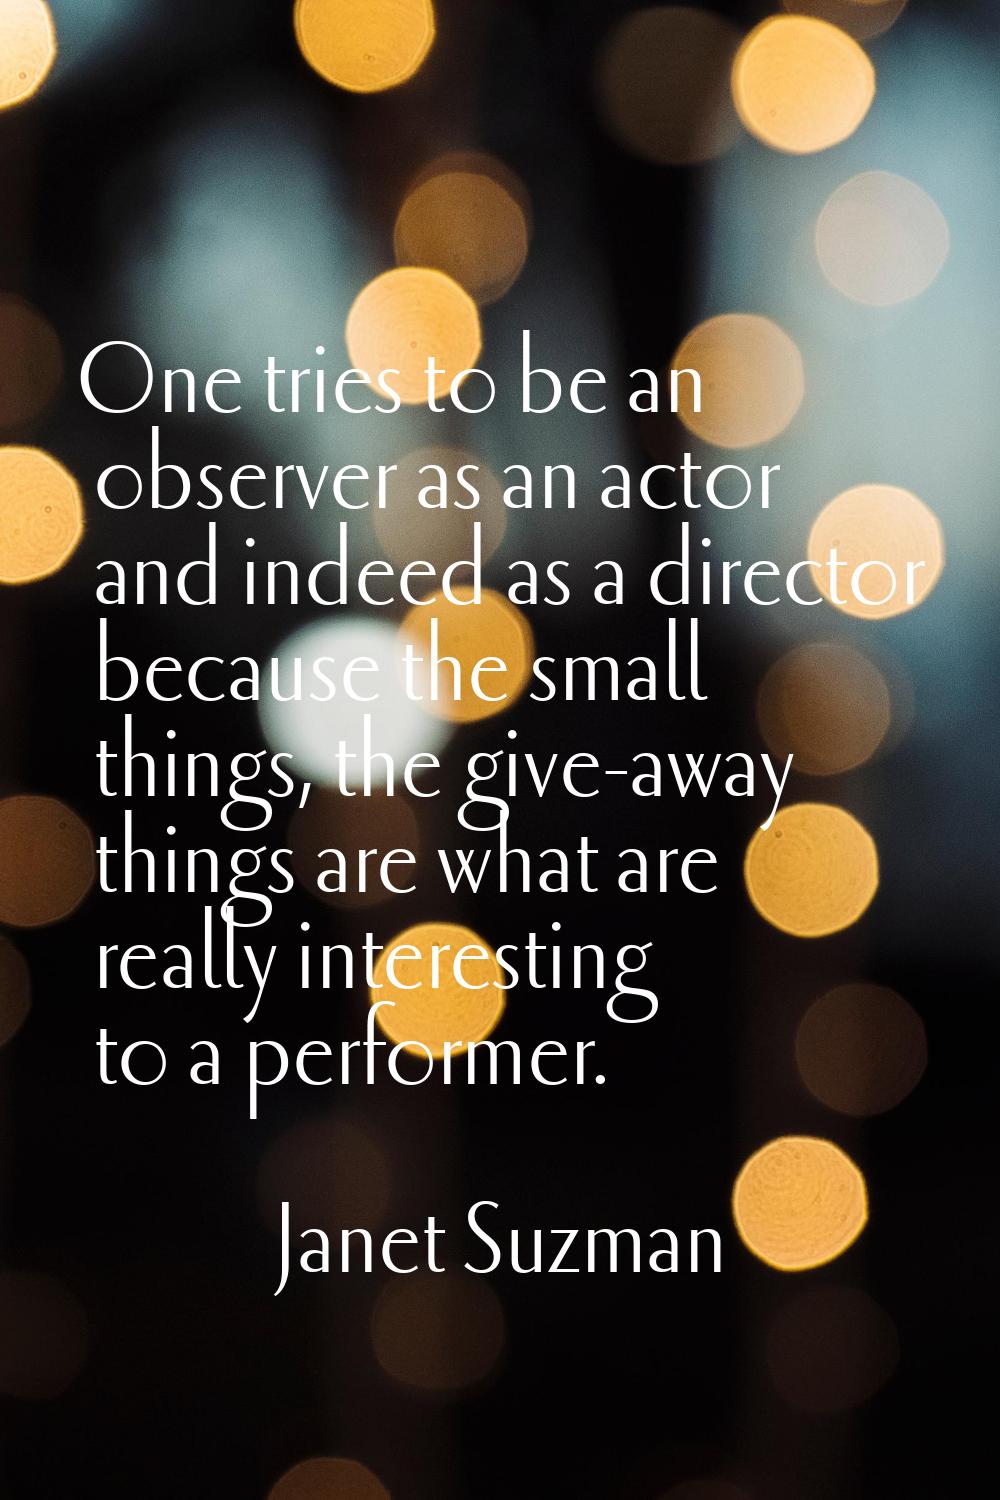 One tries to be an observer as an actor and indeed as a director because the small things, the give